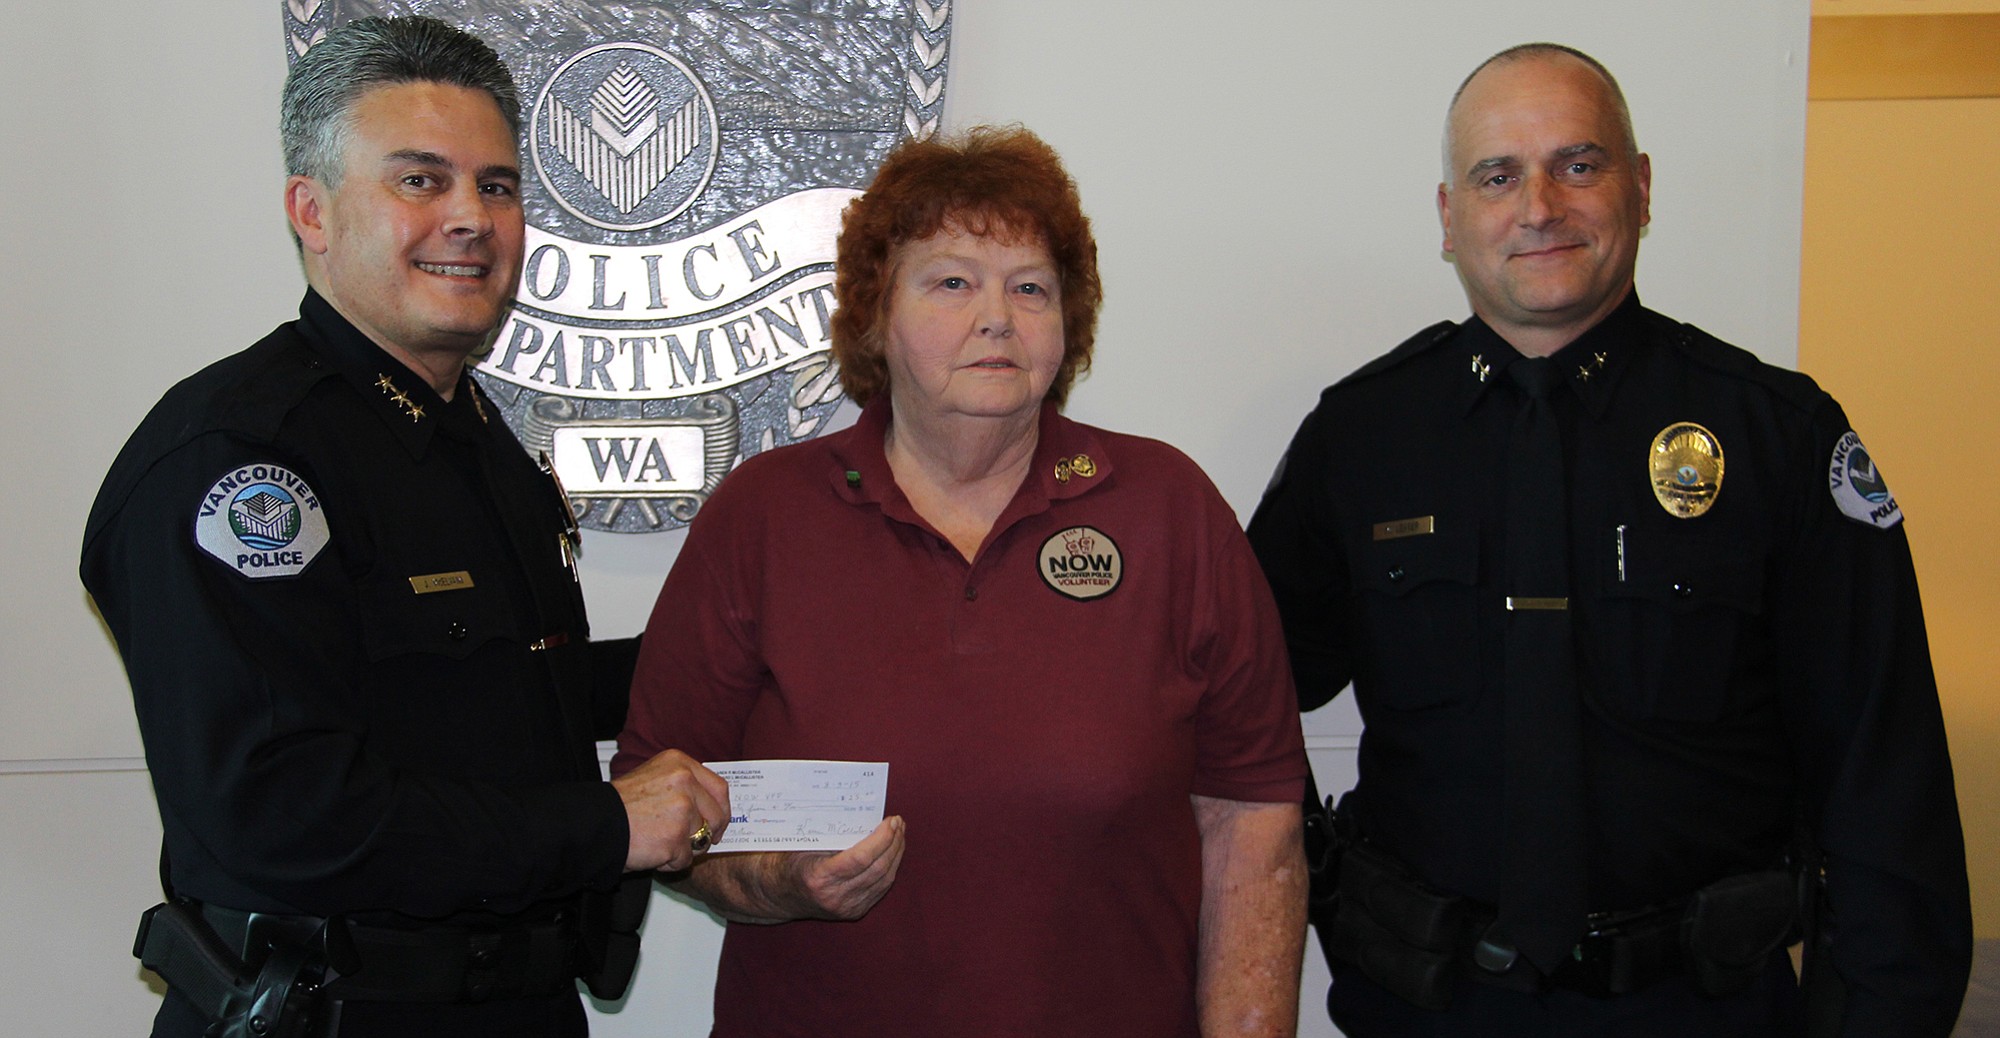 Bagley Downs: Vancouver Police Chief James McElvain, left, and Assistant Chief Mike Lester, right, accepting a $1,400 check from Karen McCallister and various neighborhood associations for the Neighbors on Watch program, which they donated in honor of her late husband, Edward &quot;Lee&quot; McCallister.